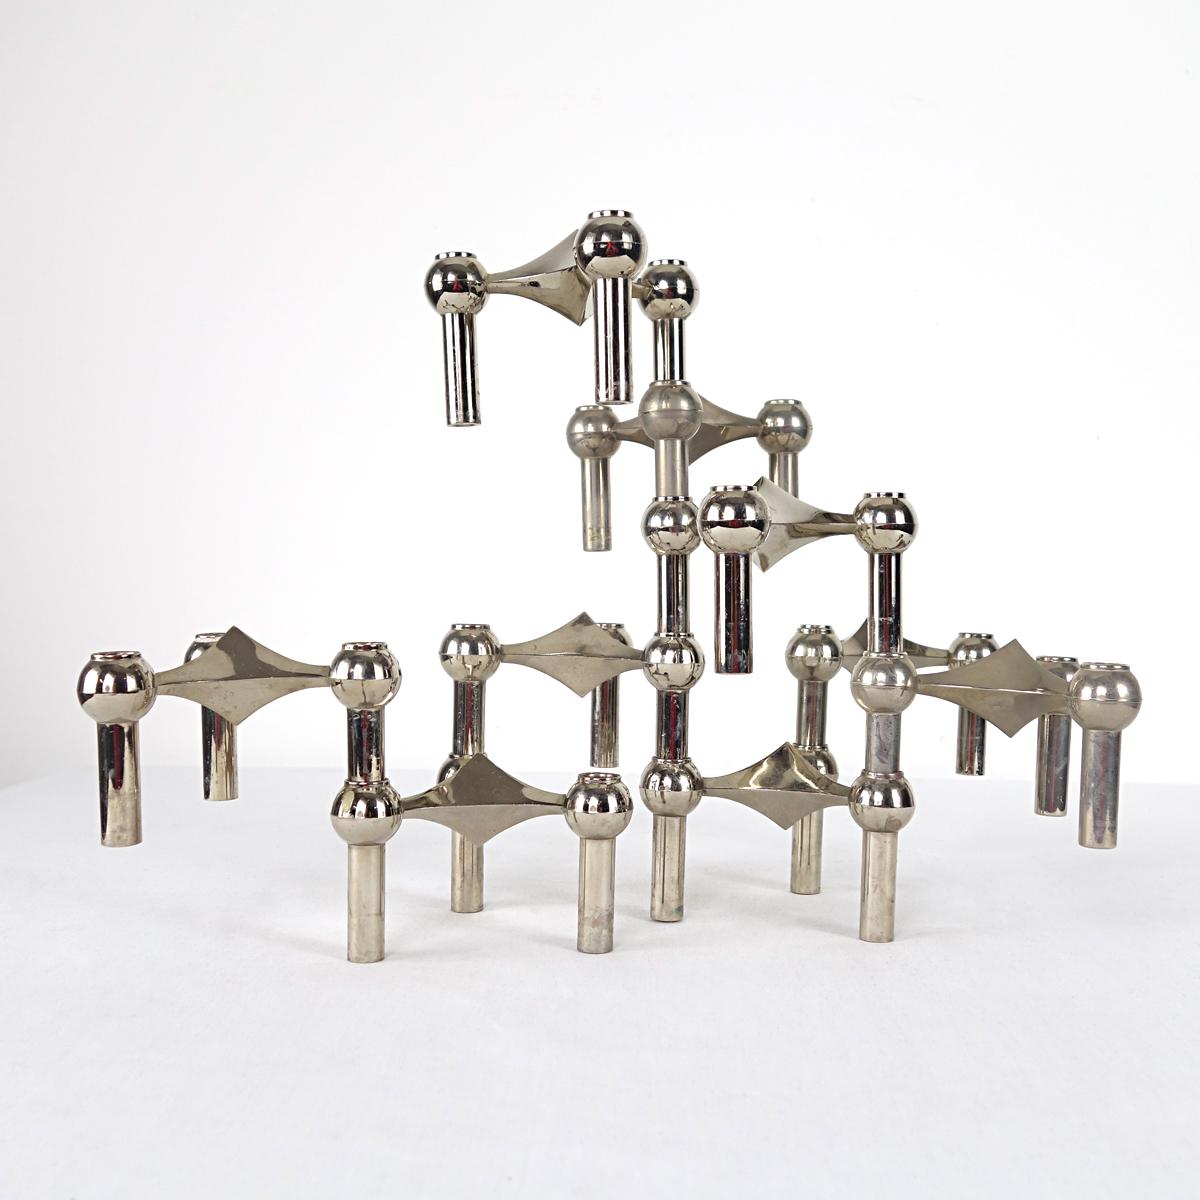 Set of 9 modular triangle shaped chrome candleholders produced by BMF in the 1960s. The candleholders can be stacked in any design you desire.